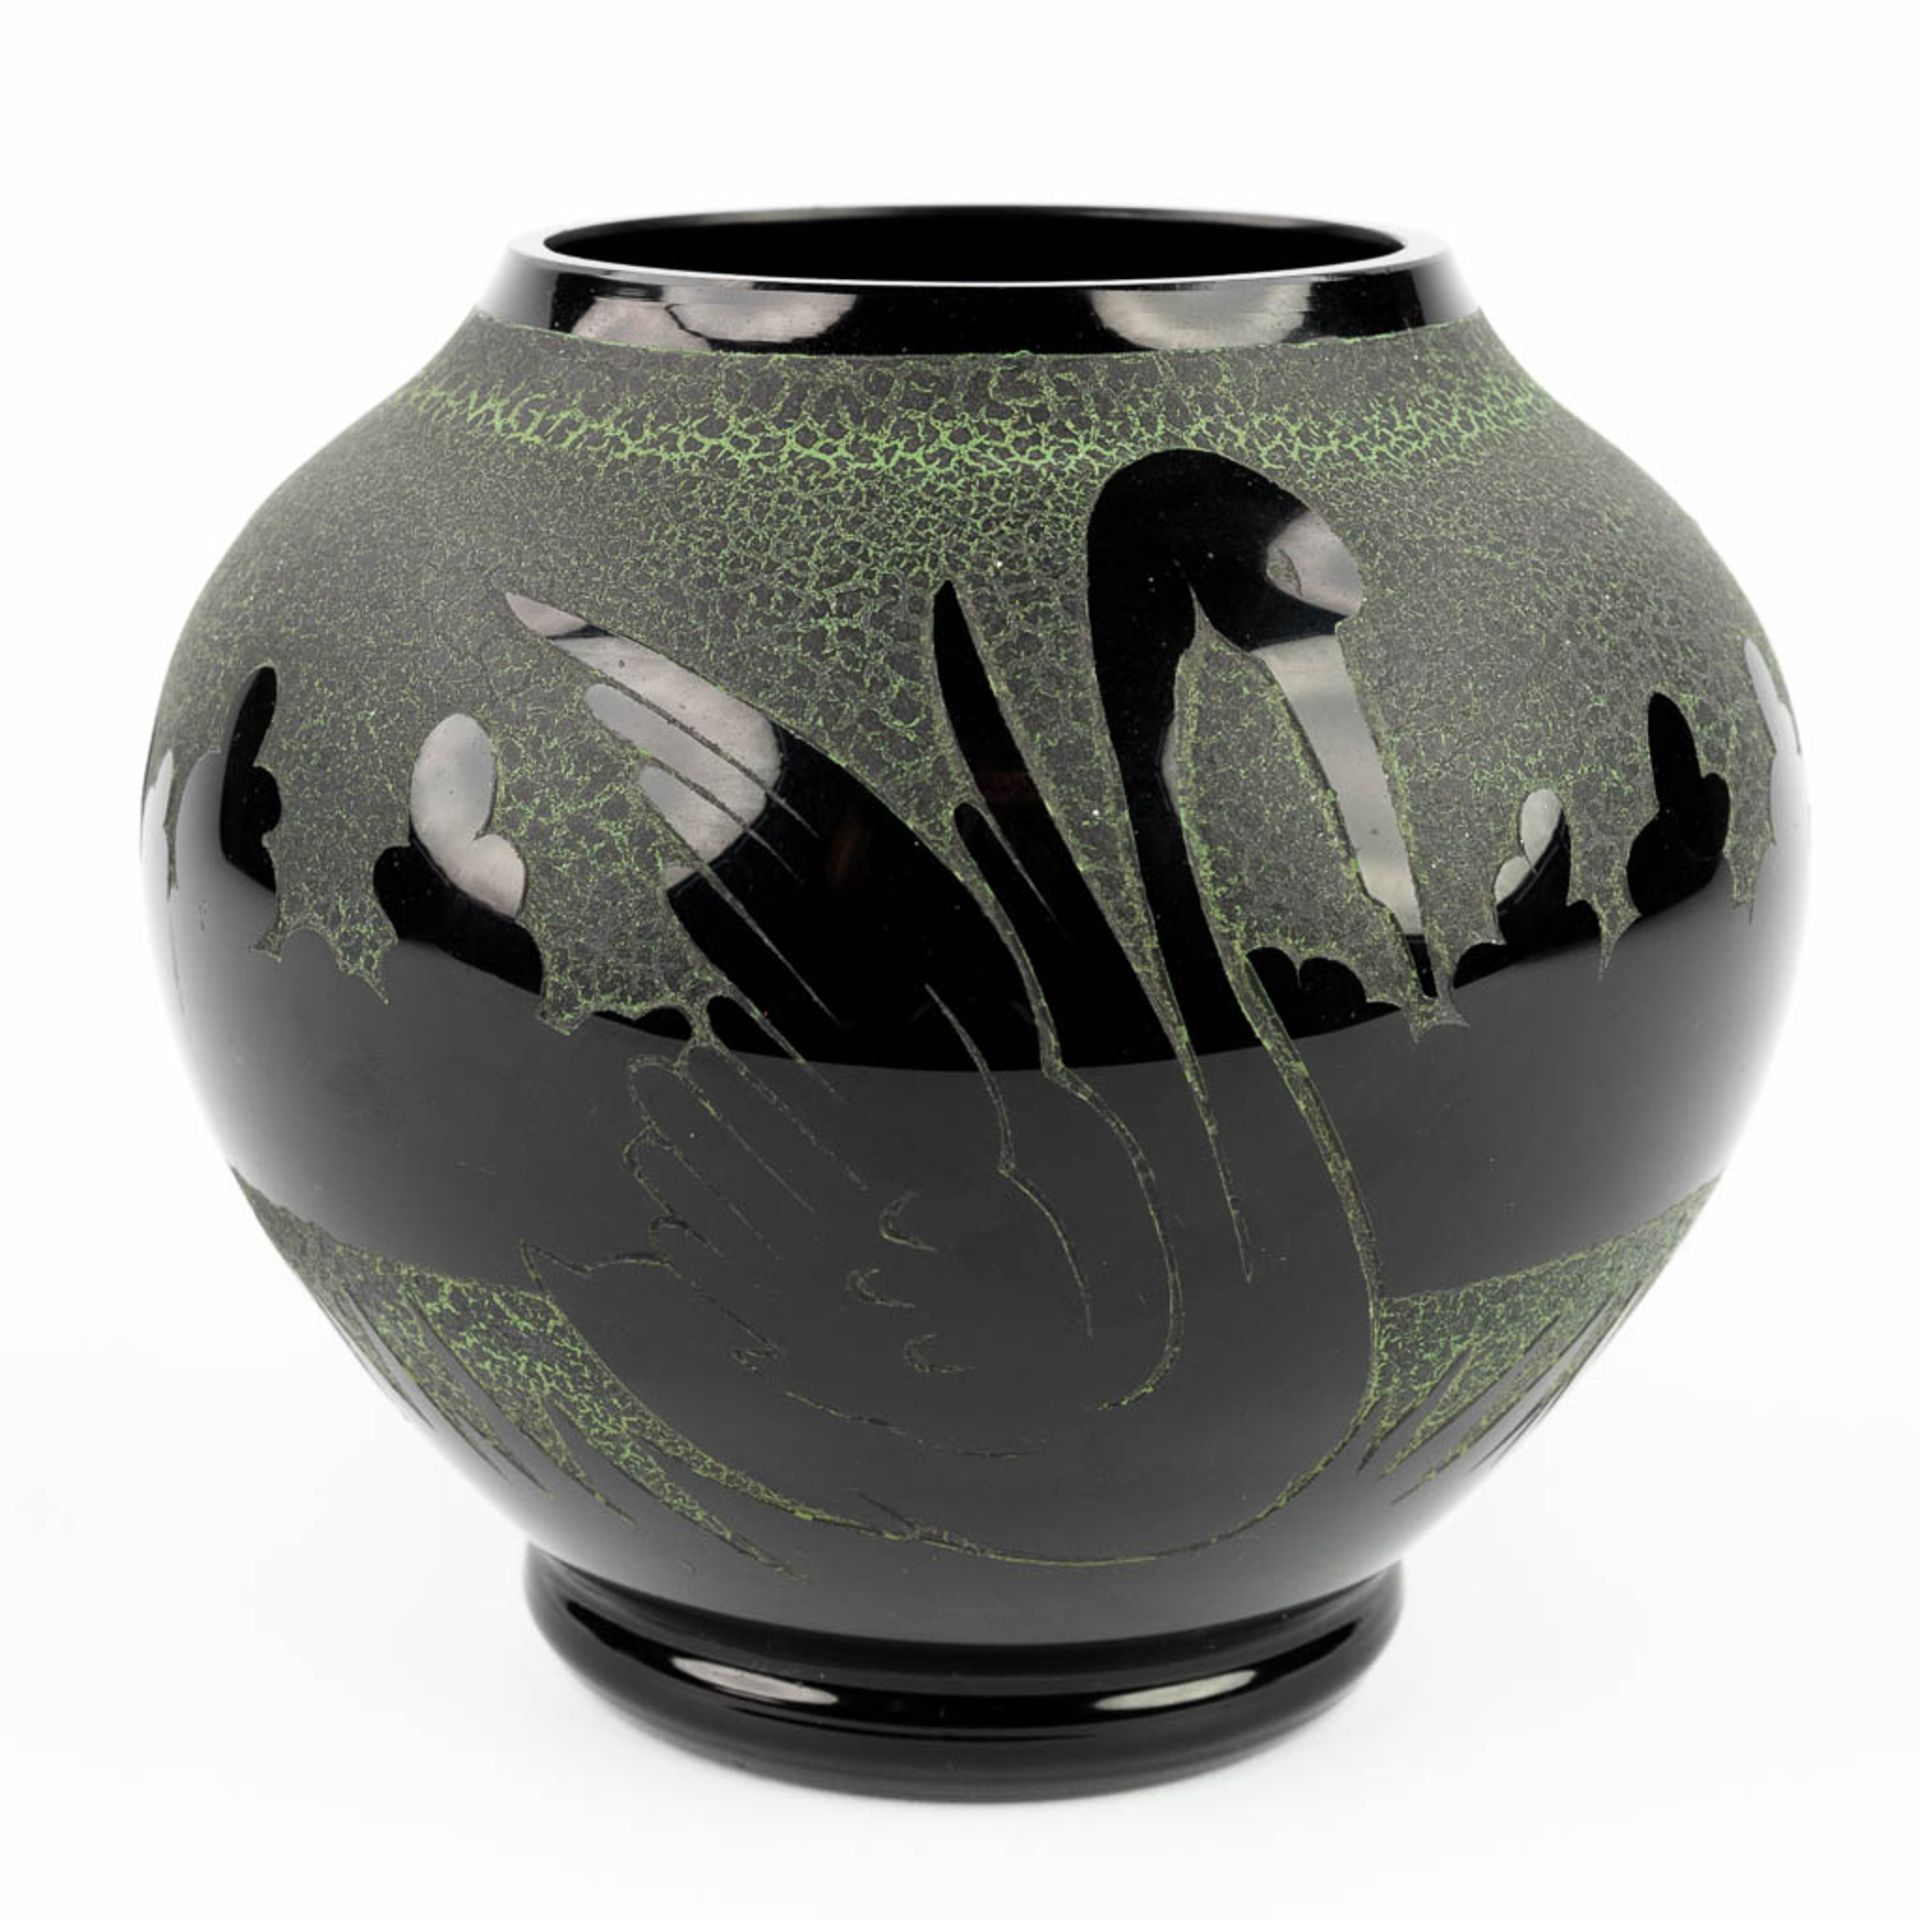 ARTVER Paul HELLER (XX), a vase 'Booms Glass' decorated with swans. (15,5 x 16cm)